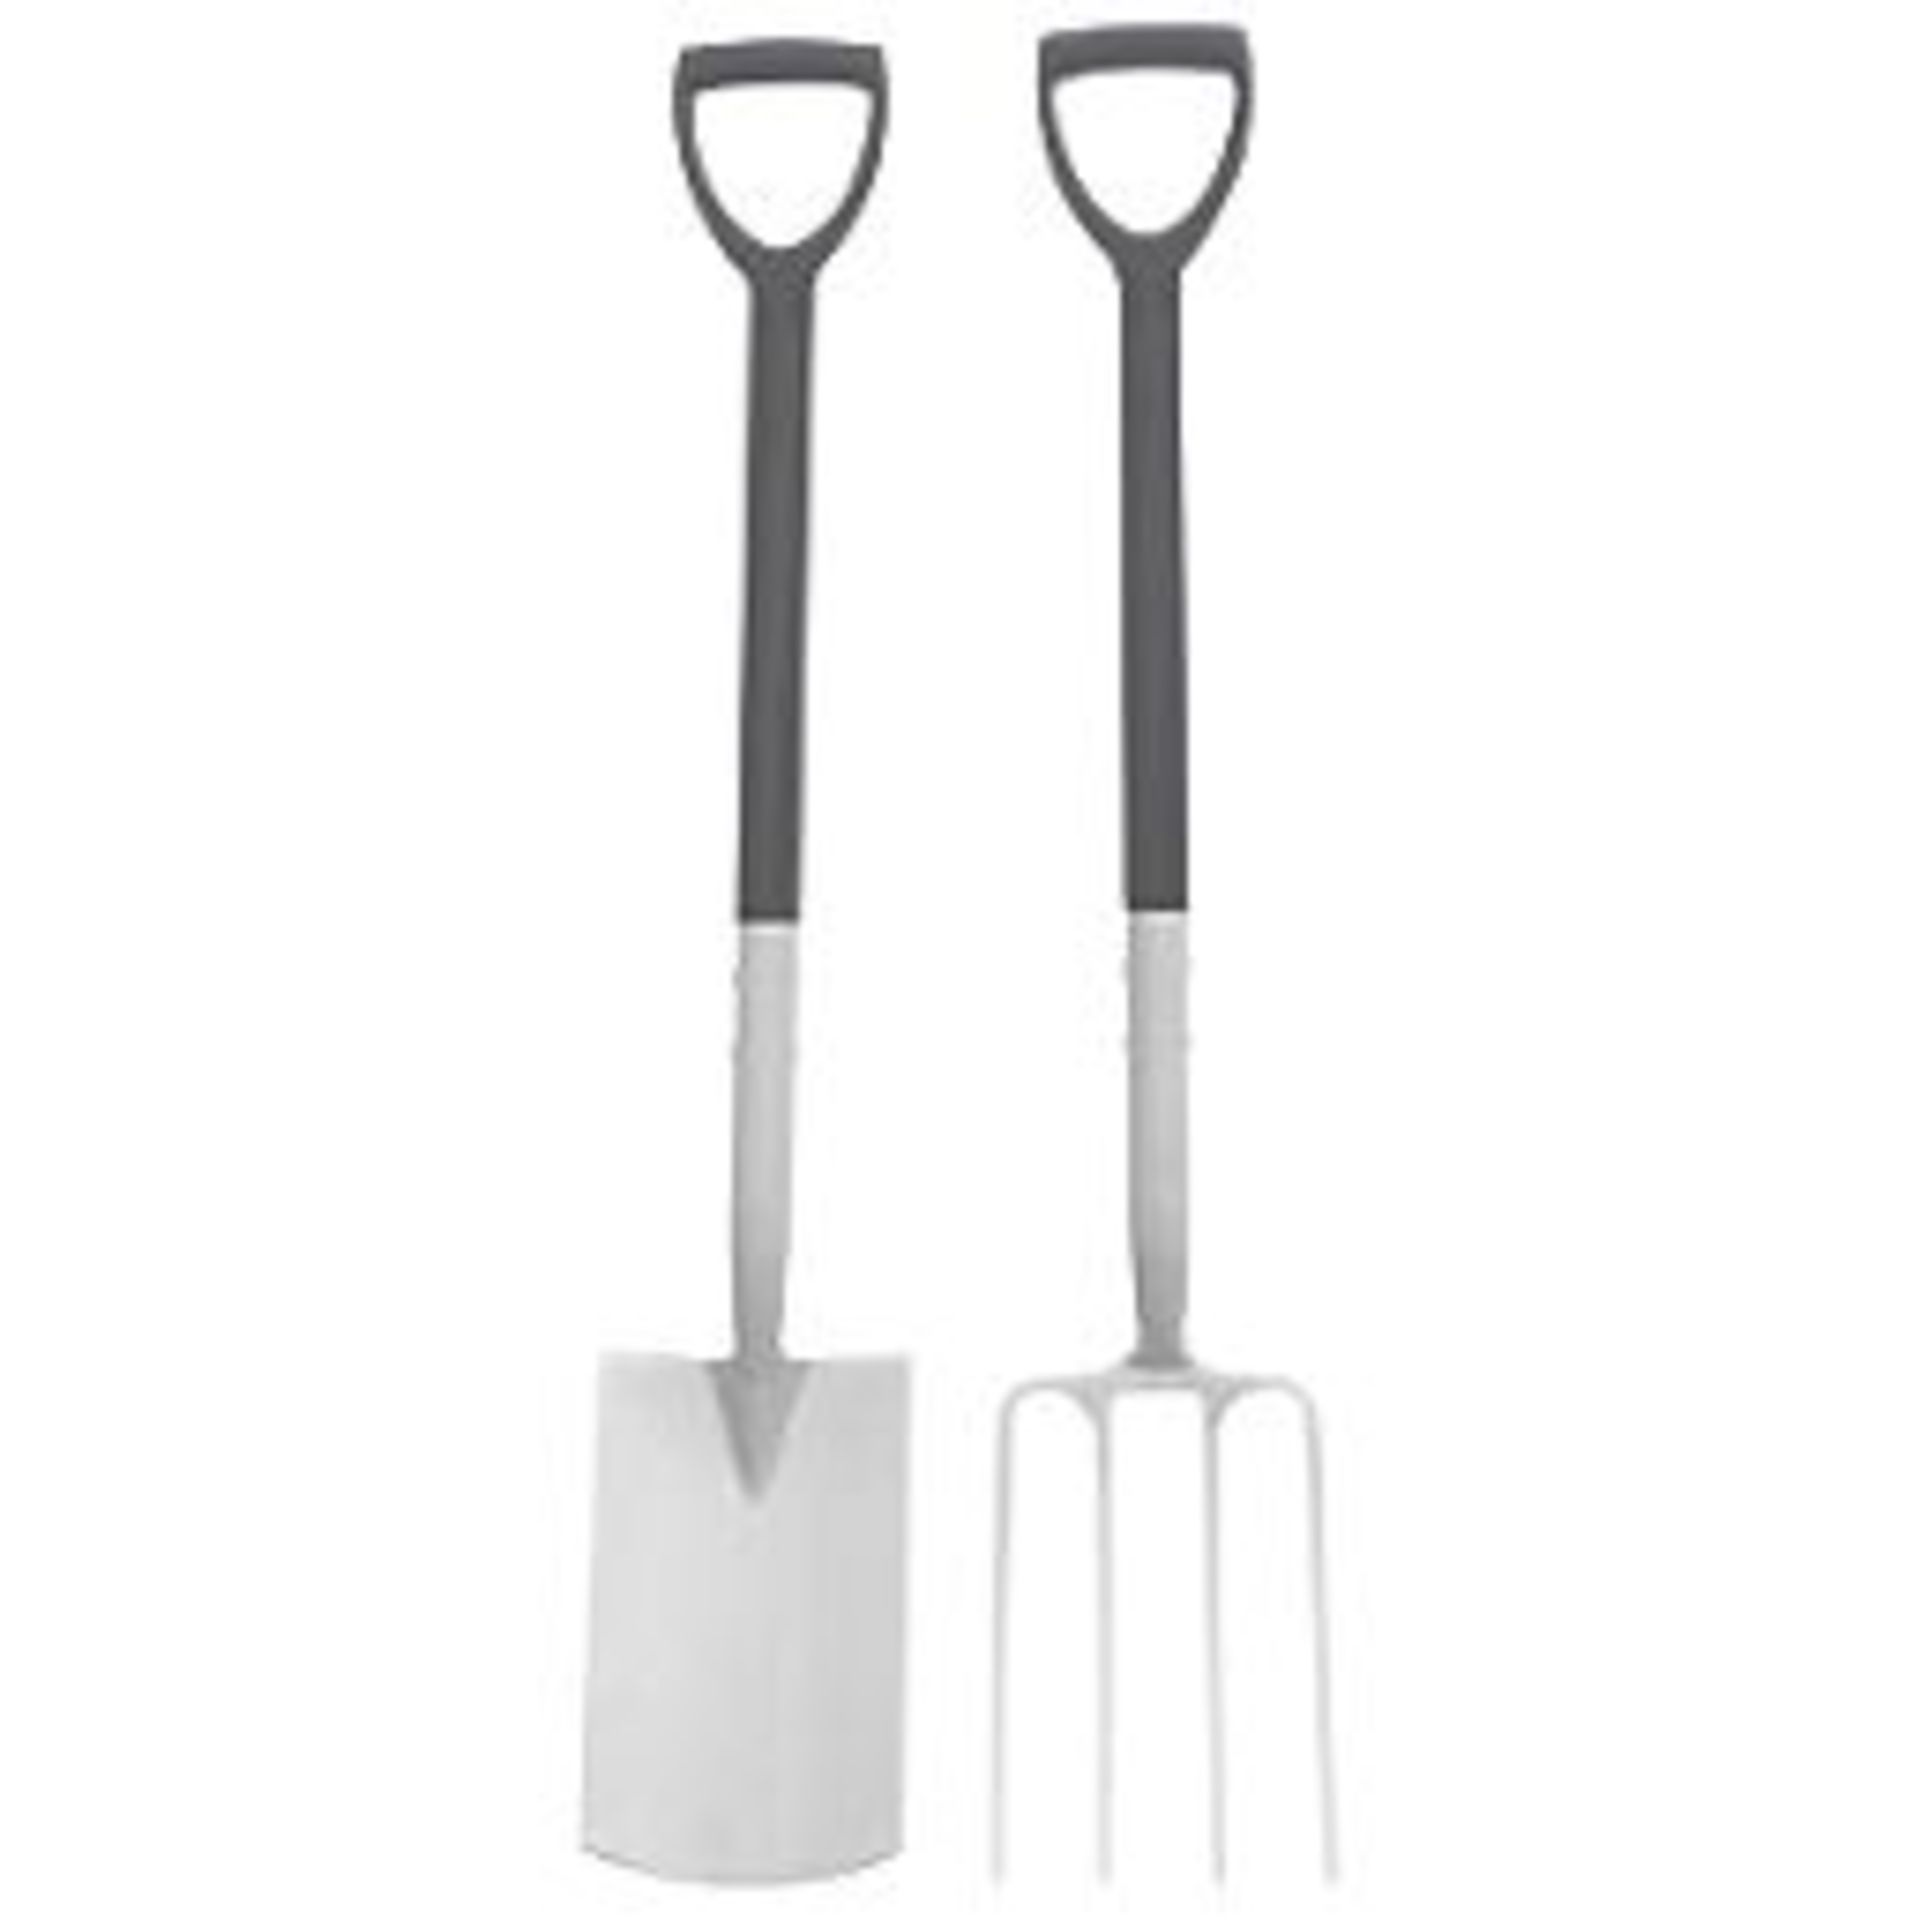 2 x FORGE STEEL DIGGING FORK & SPADE 2 PCS. - P5. Heat-treated carbon steel for extra strength.